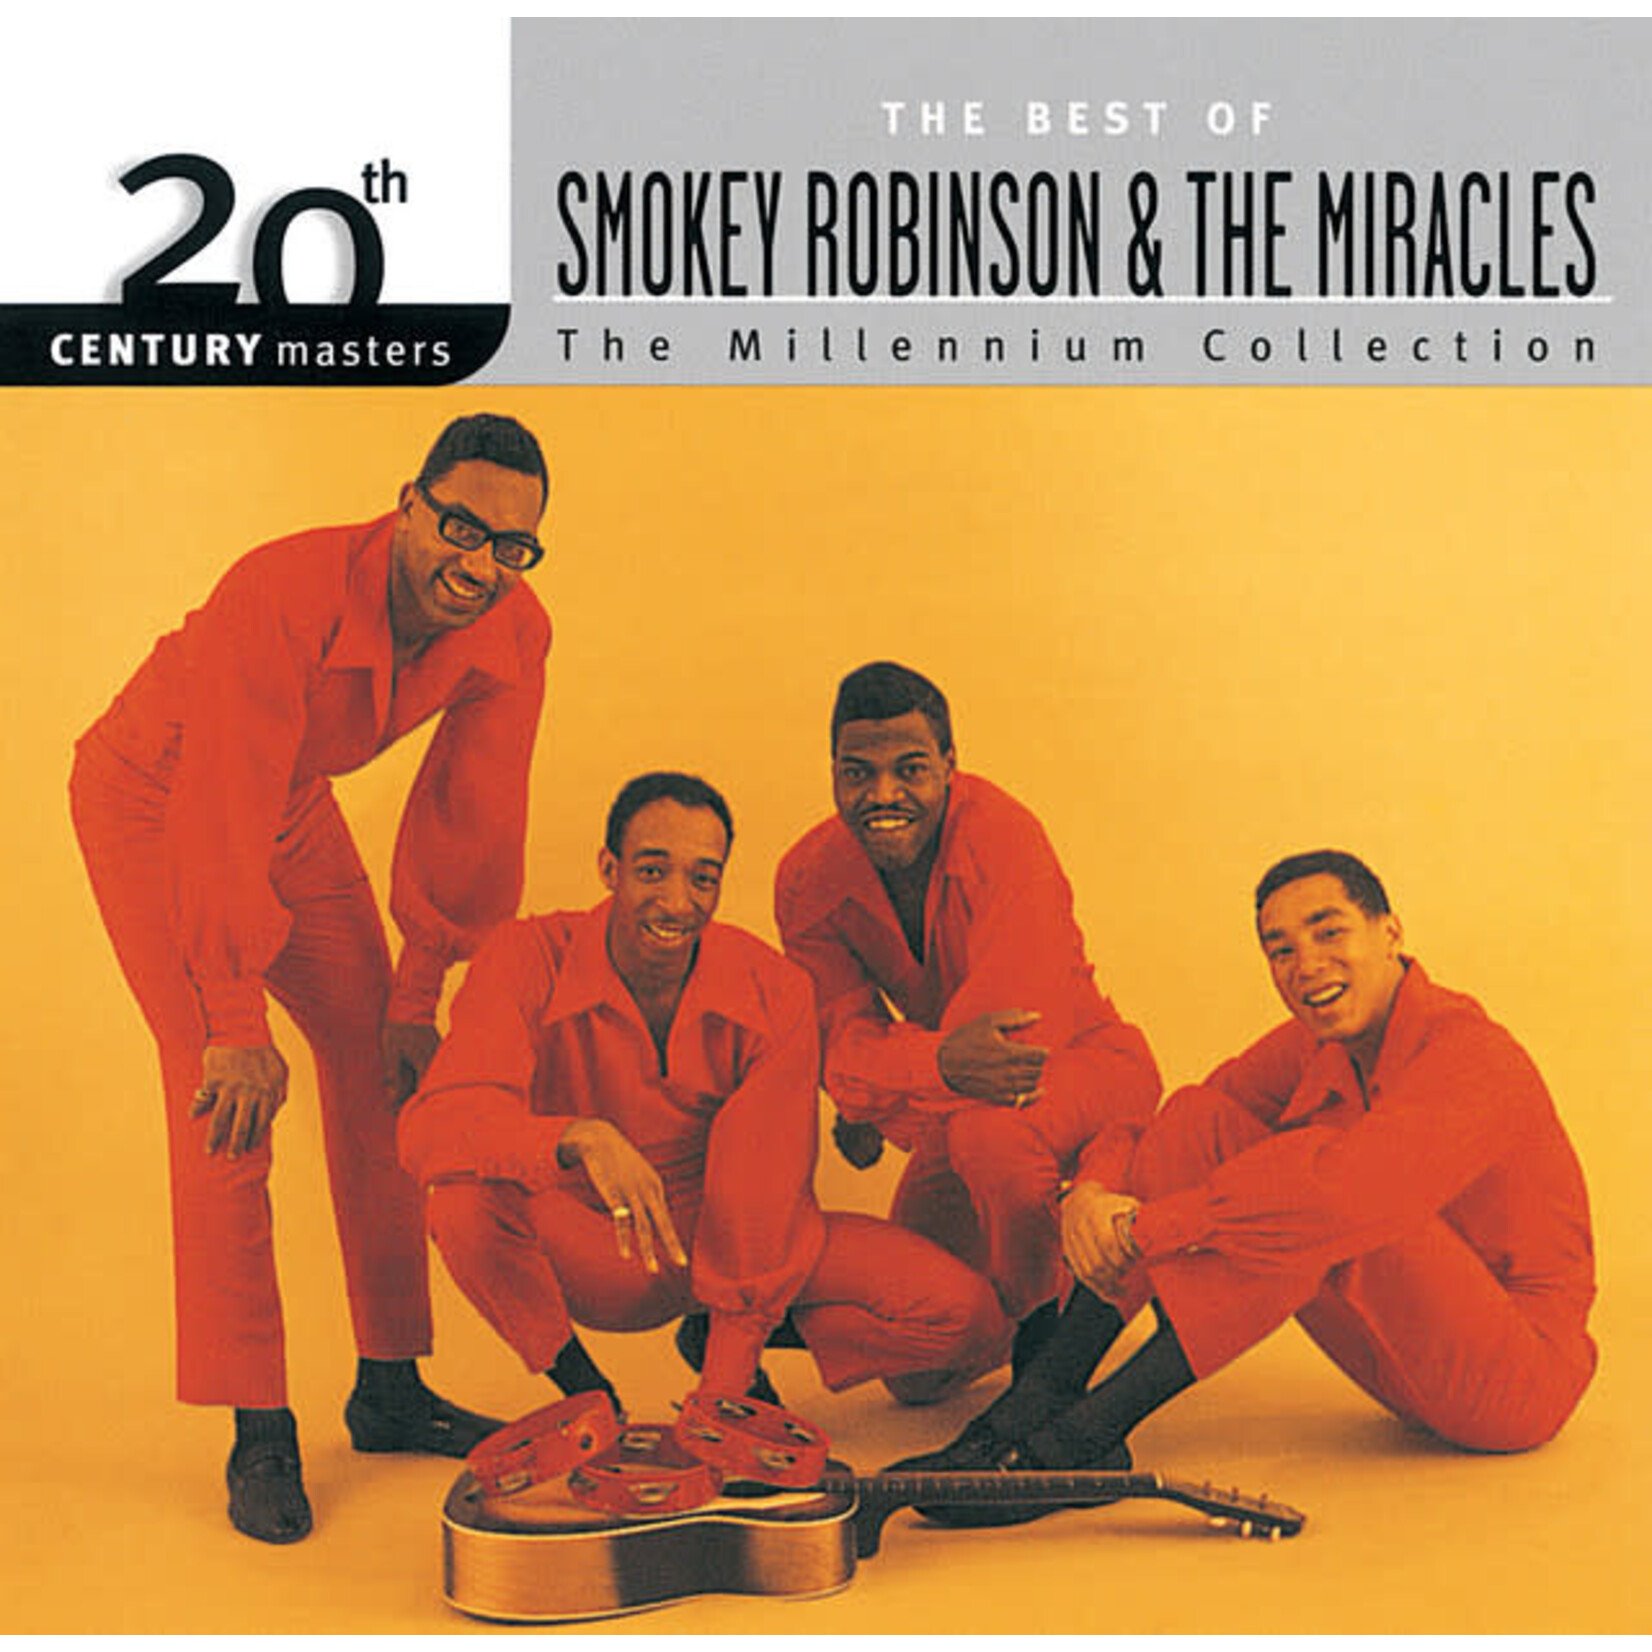 Smokey Robinson & The Miracles - The Best Of Smokey Robinson & The Miracles: 20th Century Masters The Millennium Collection [USED CD]